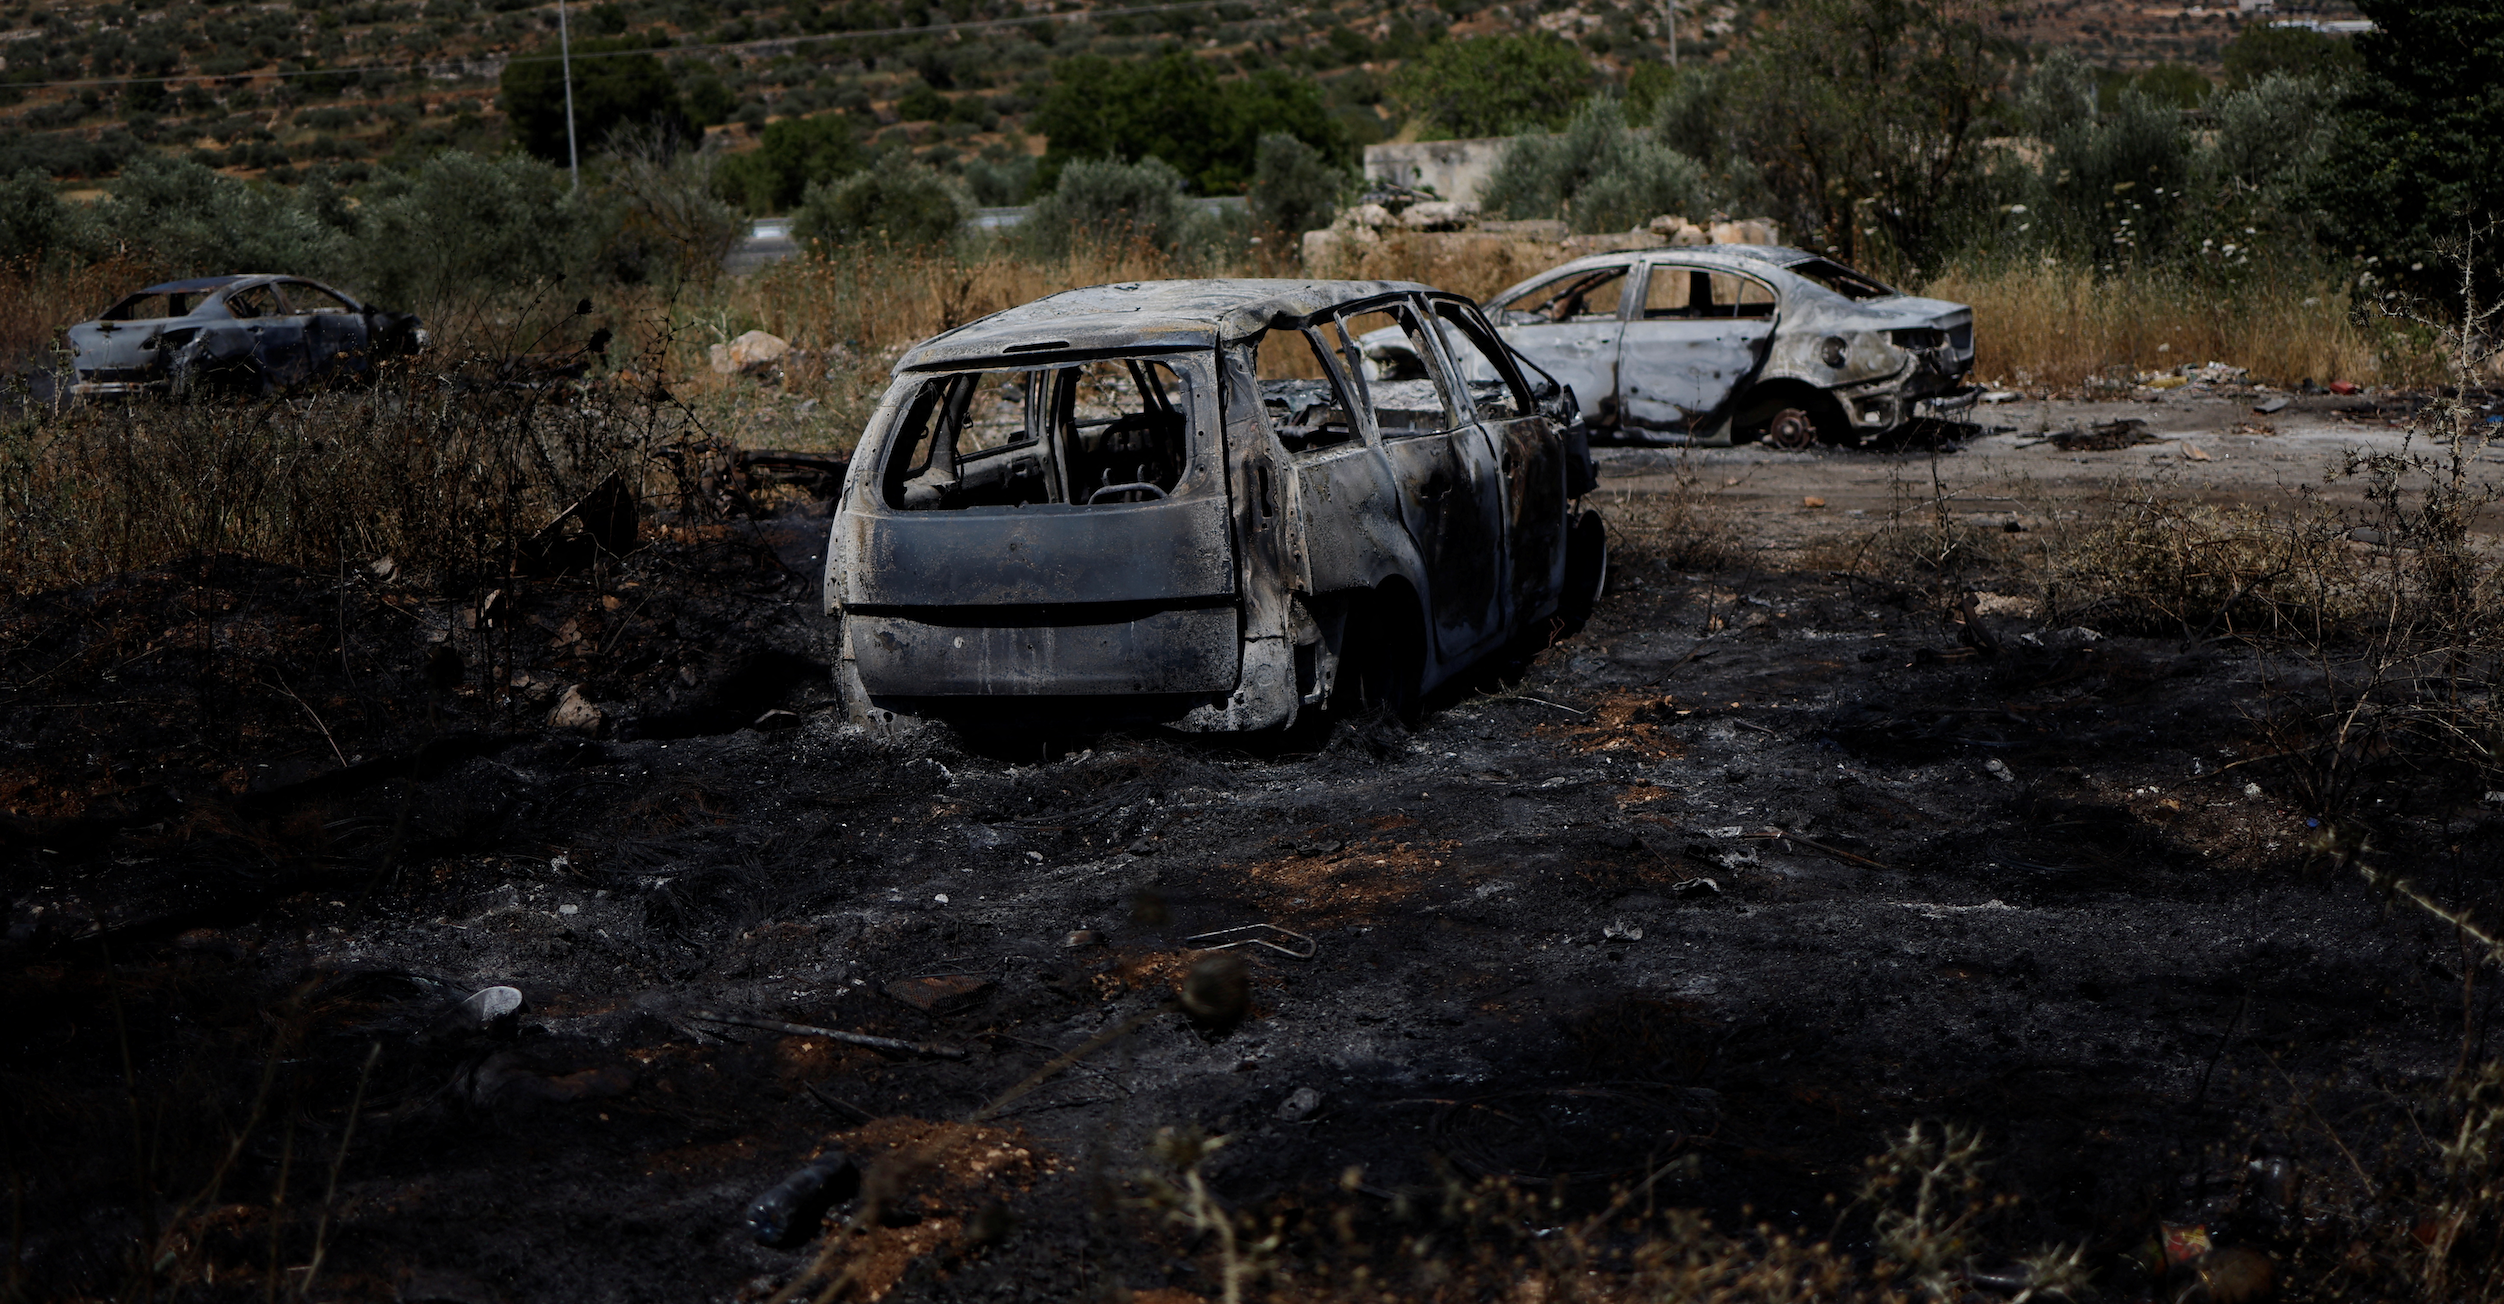 A view shows burned vehicles after an attack by Israeli settlers near Ramallah in the Israeli-occupied West Bank